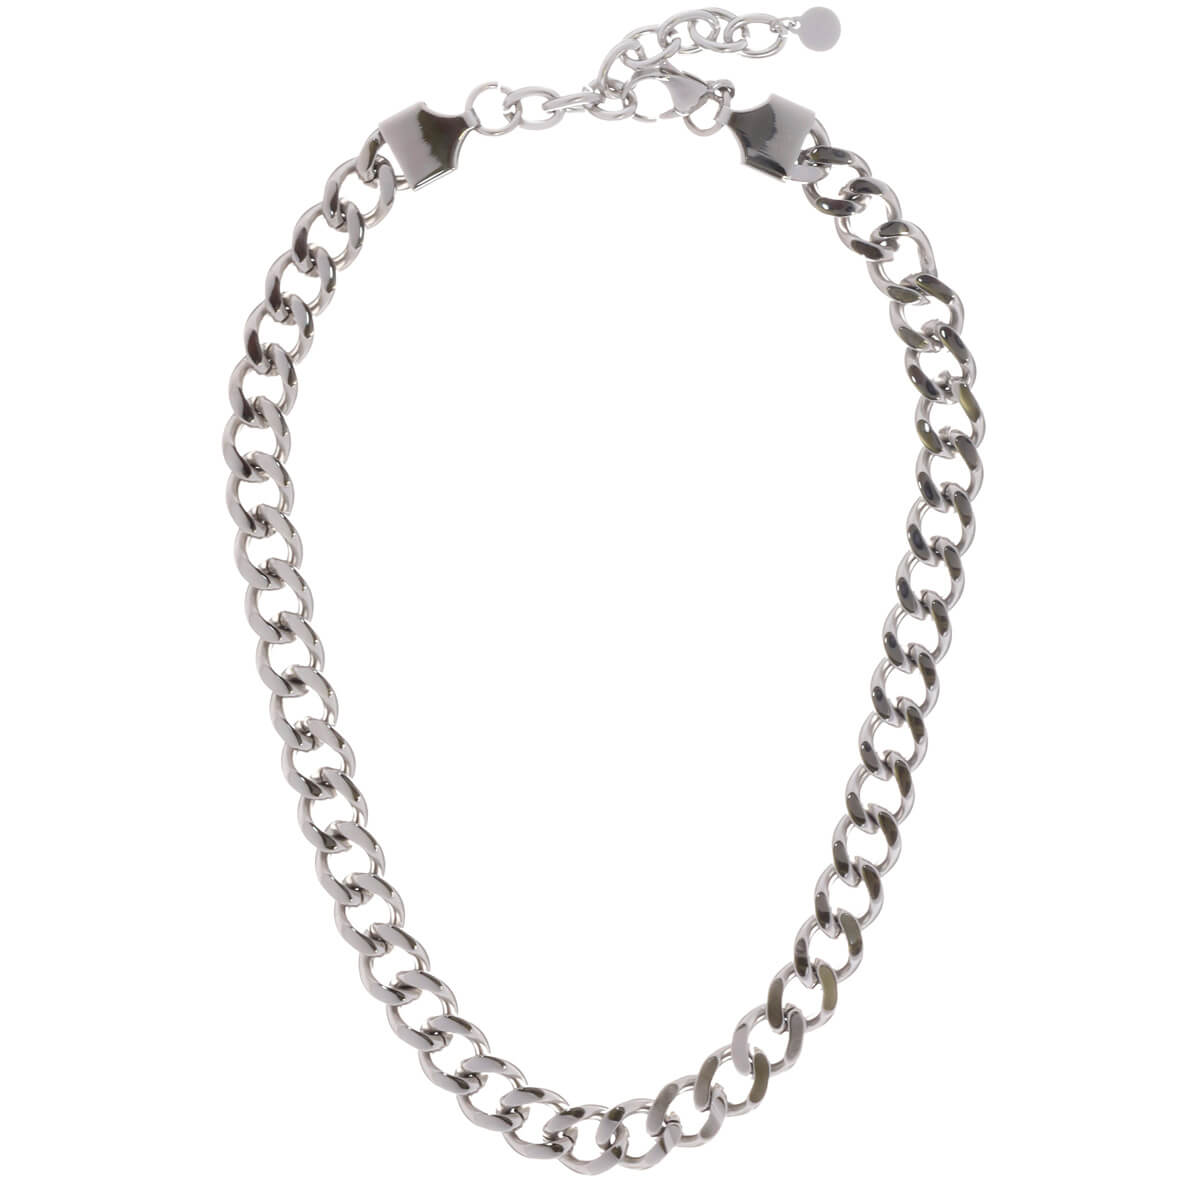 Wide armoured chain steel necklace 45cm +5cm